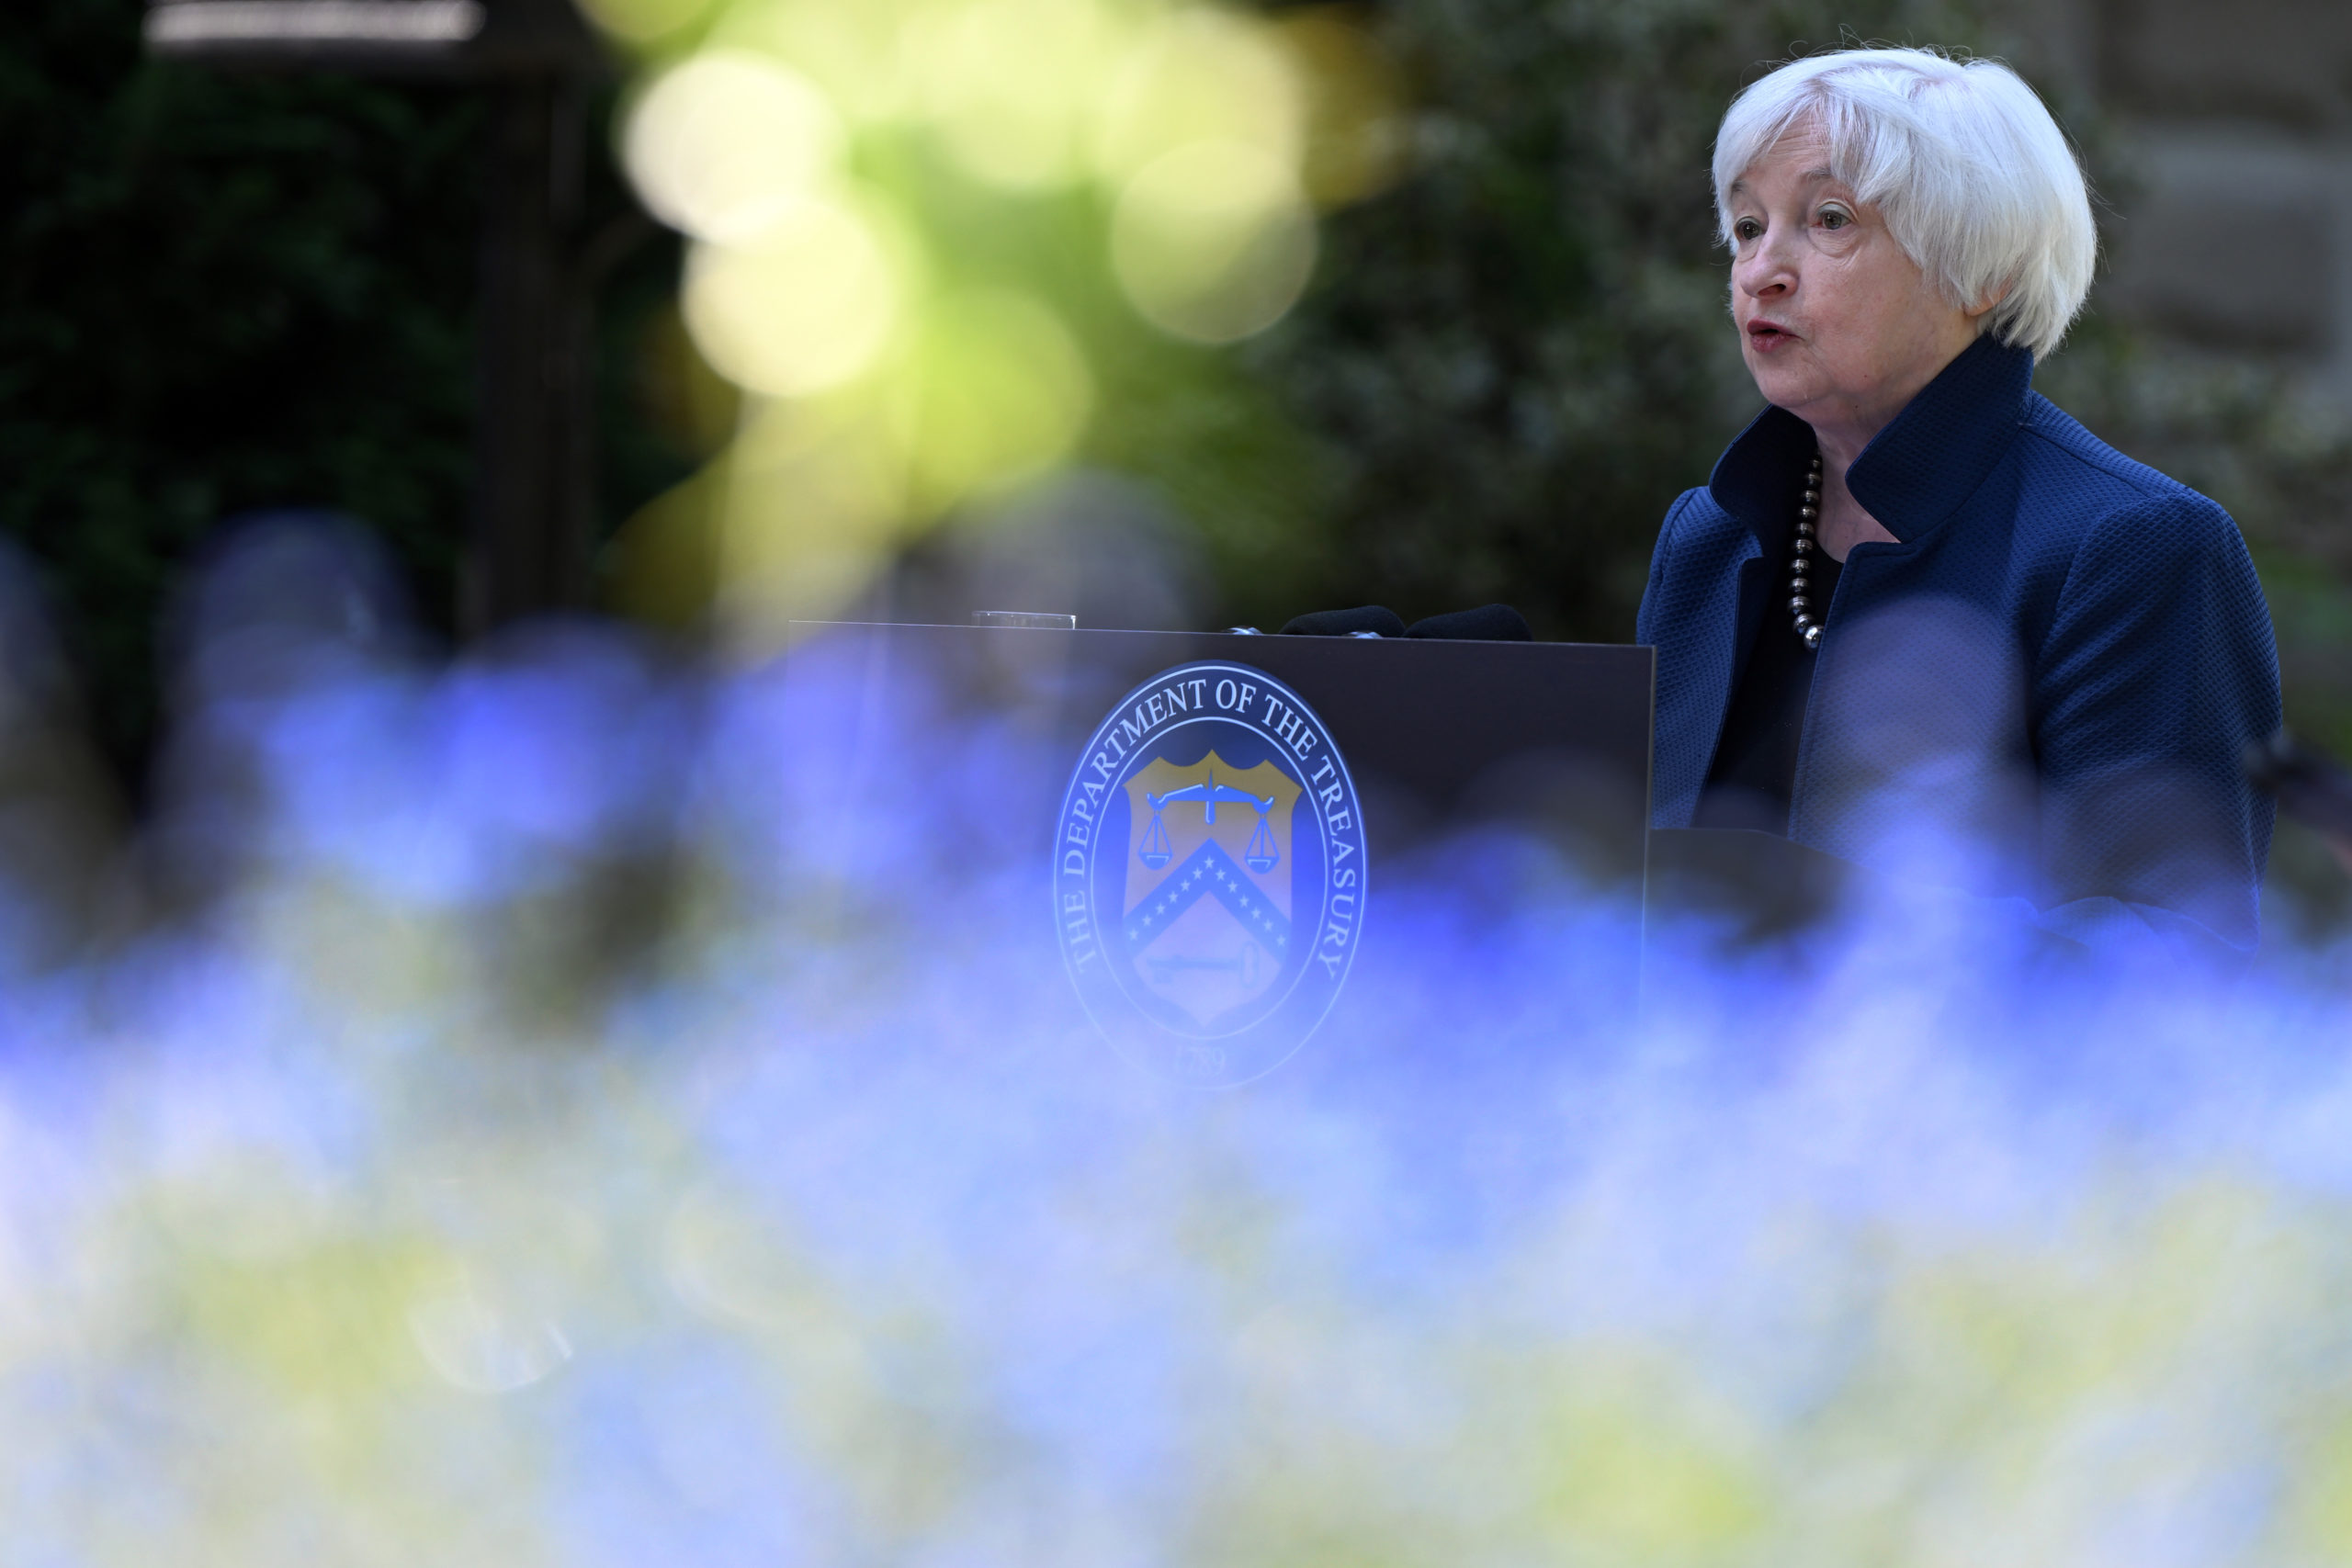 Yellen denies urging smaller relief plan, saying economic risks when Biden took office included ‘downturn that could match the Great Depression’